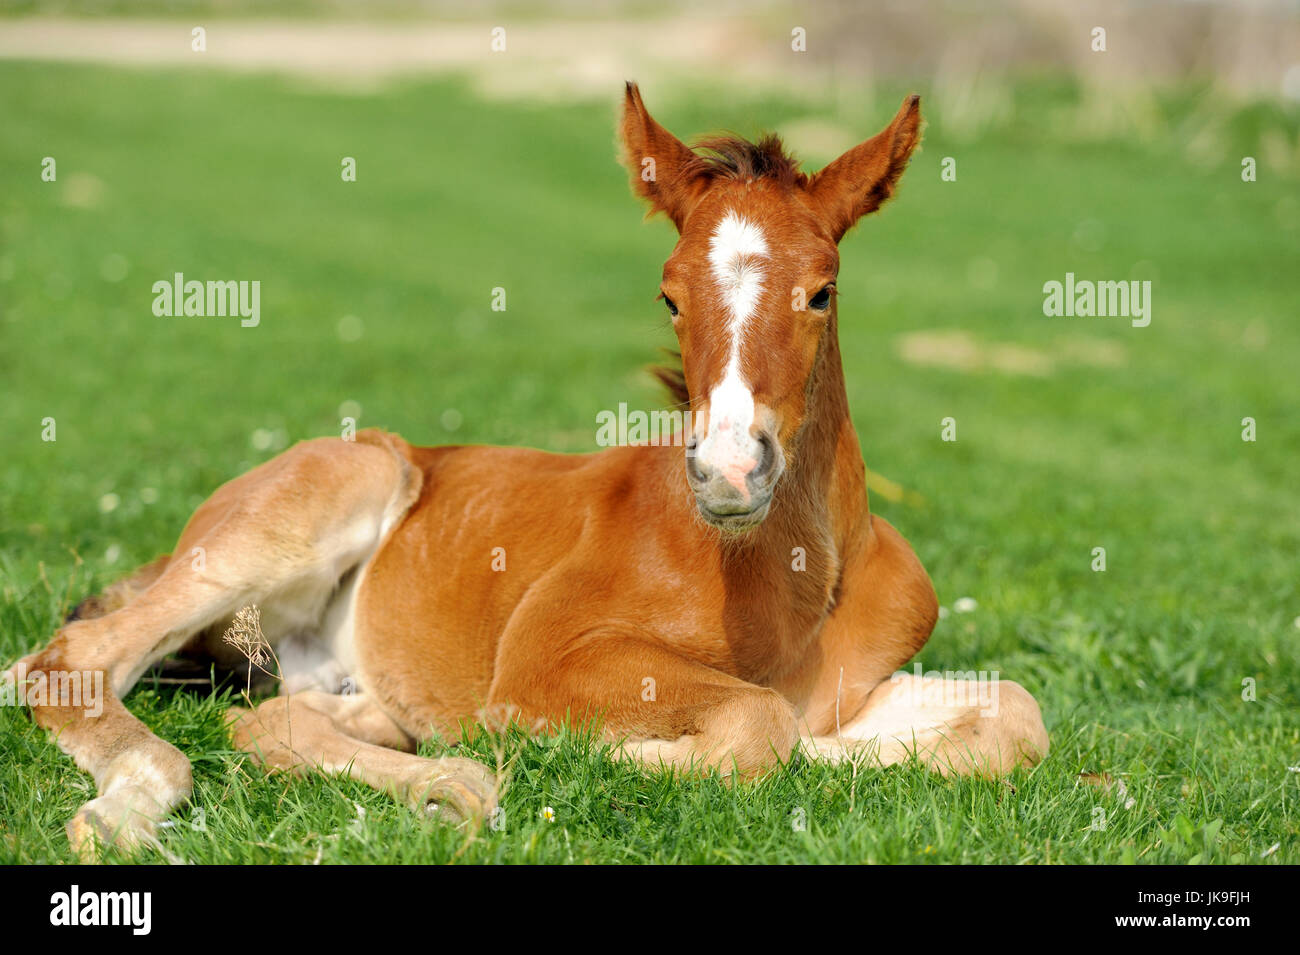 Colt on a meadow in summer day Stock Photo